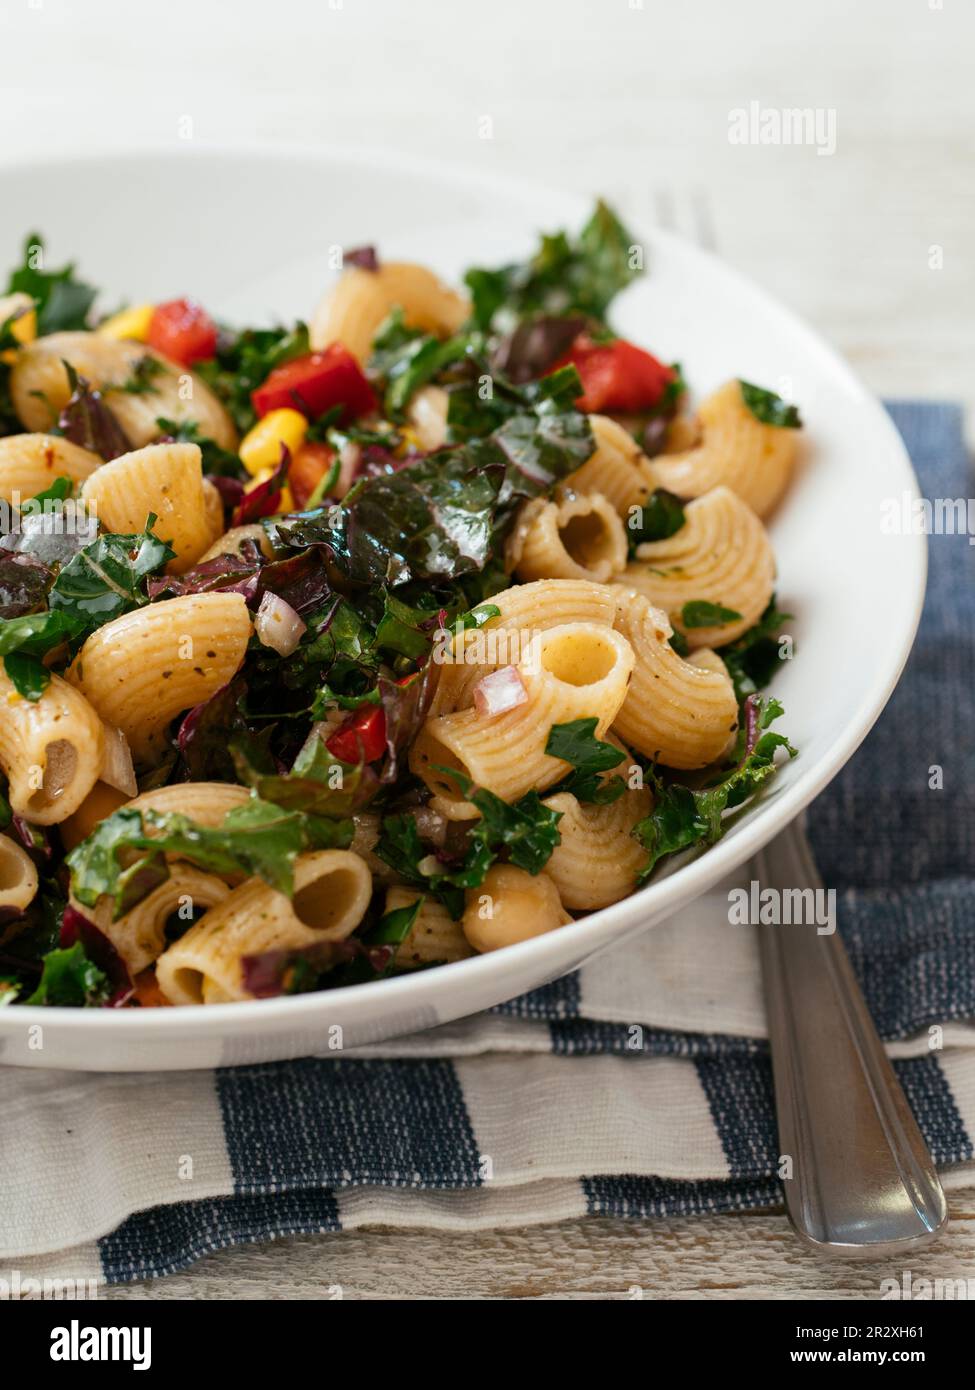 Bowl with a vegan home made kale pasta salad using the heirloom variety 'Red Russian'. Stock Photo